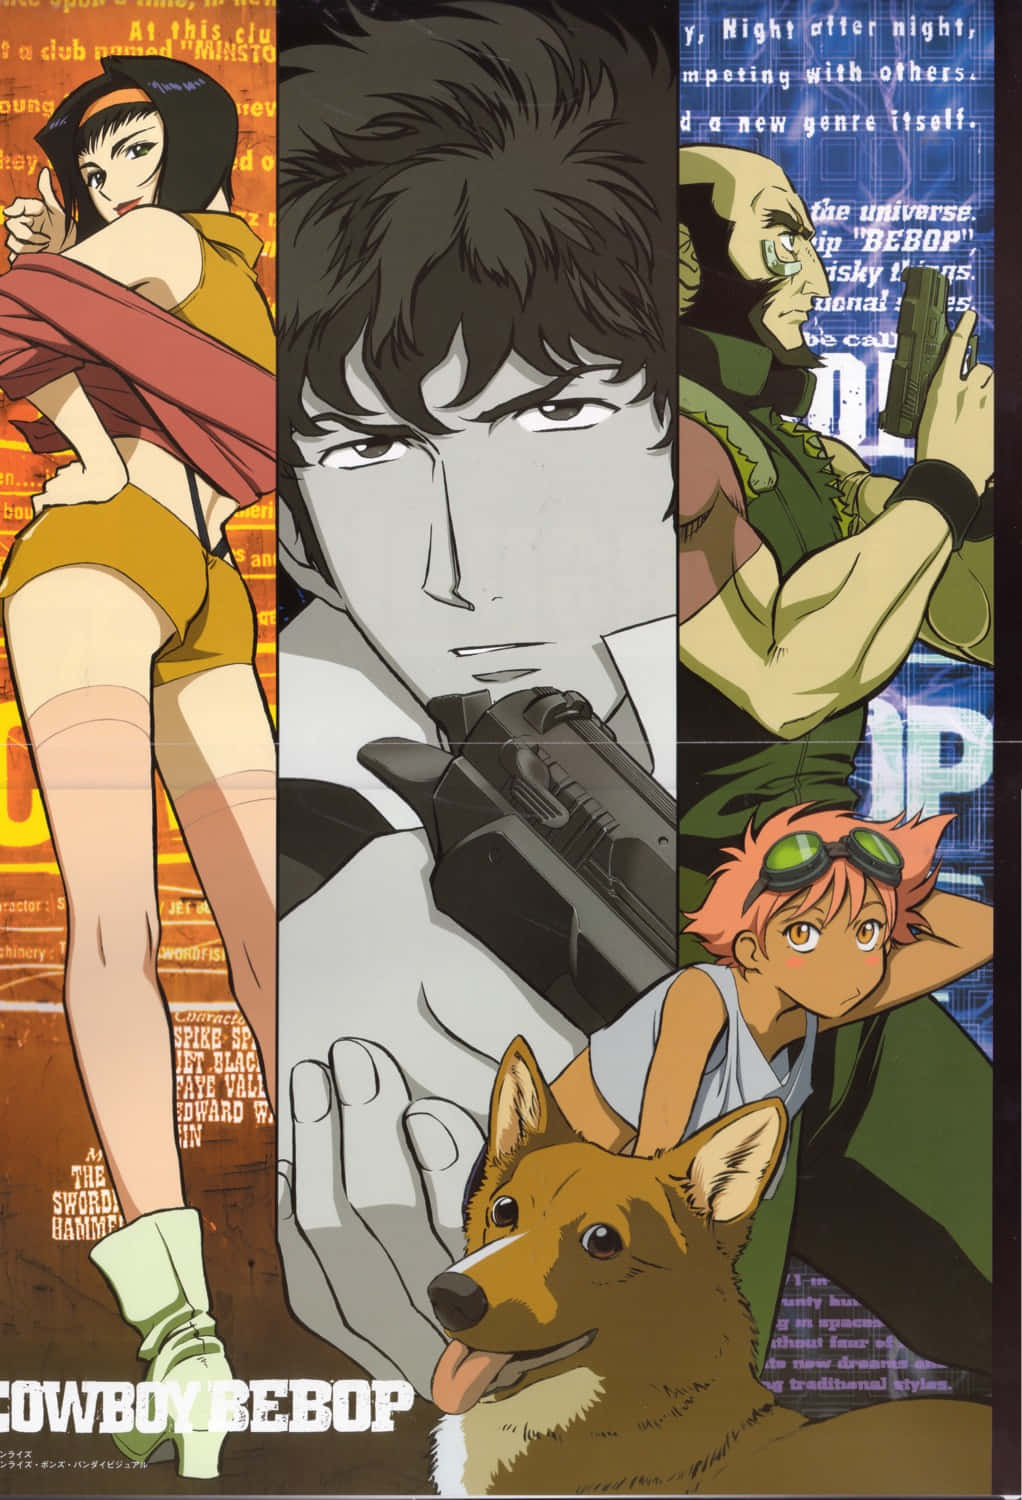 Edward from Cowboy Bebop sitting and smiling with her laptop in a futuristic setting Wallpaper